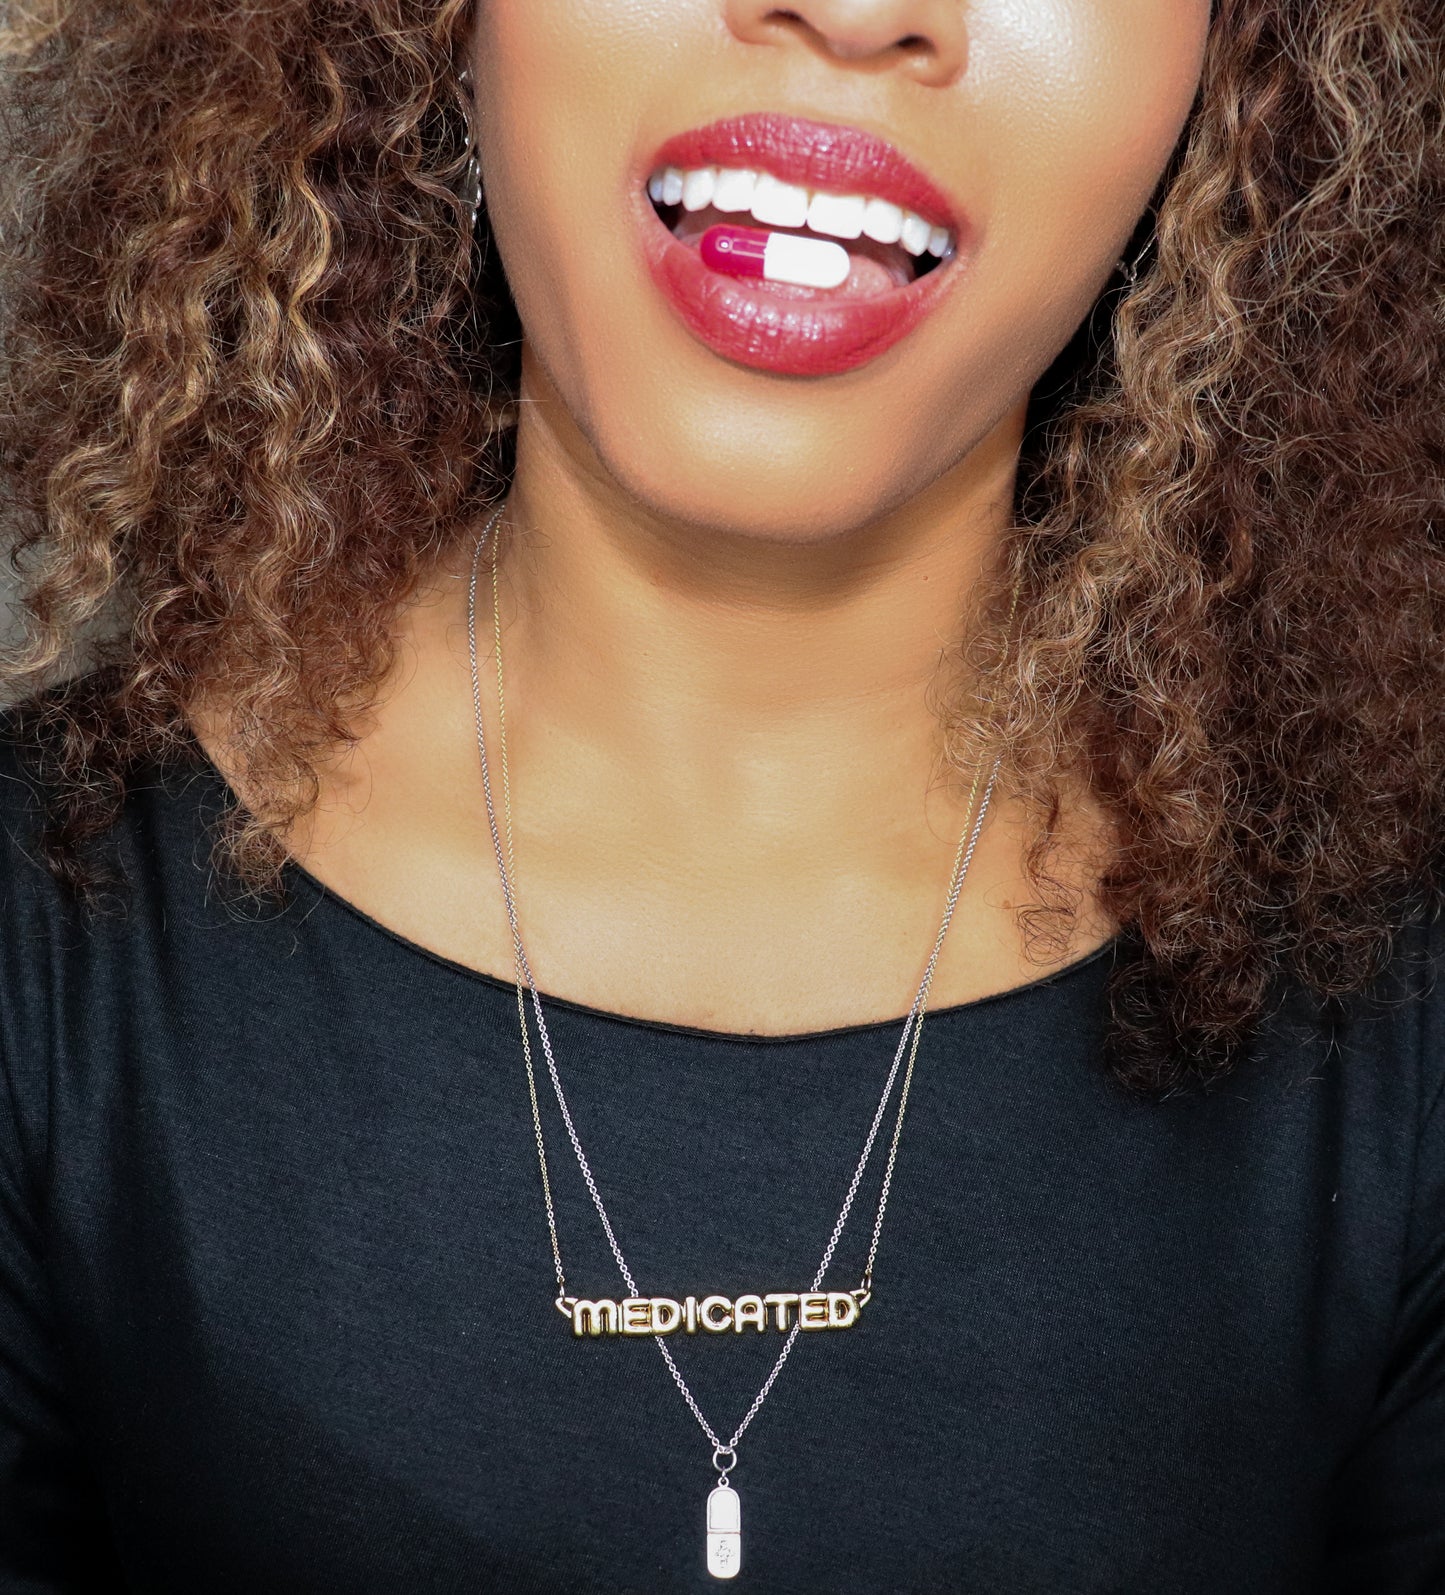 black woman with curly hair in a black dress with pill in her mouth wearing a necklace that says medicated